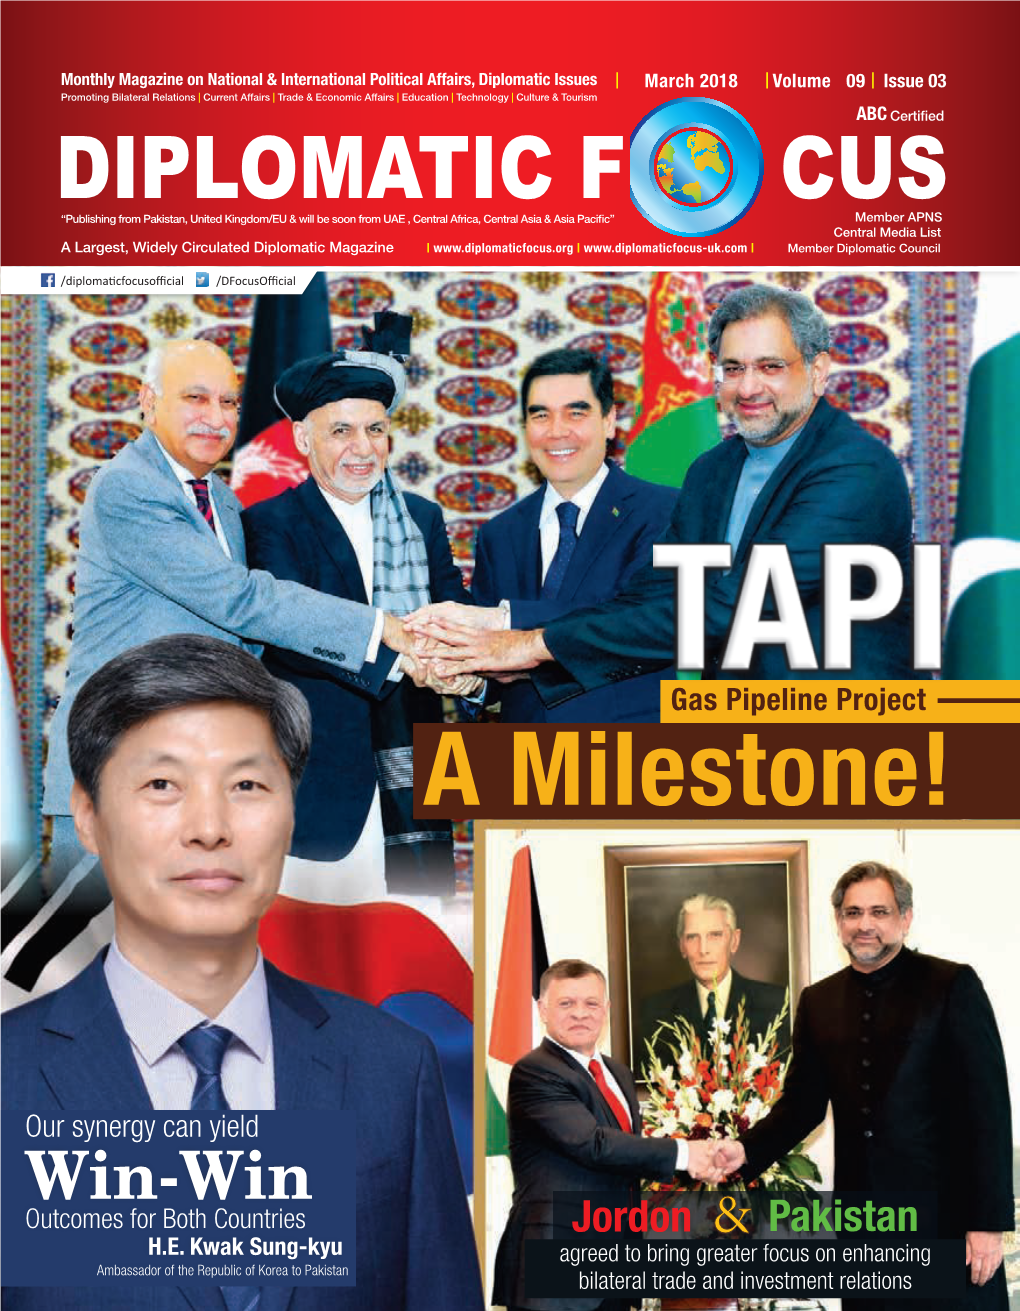 March 2018 Volume 09 Issue 03 Promoting Bilateral Relations | Current Affairs | Trade & Economic Affairs | Education | Technology | Culture & Tourism ABC Certified